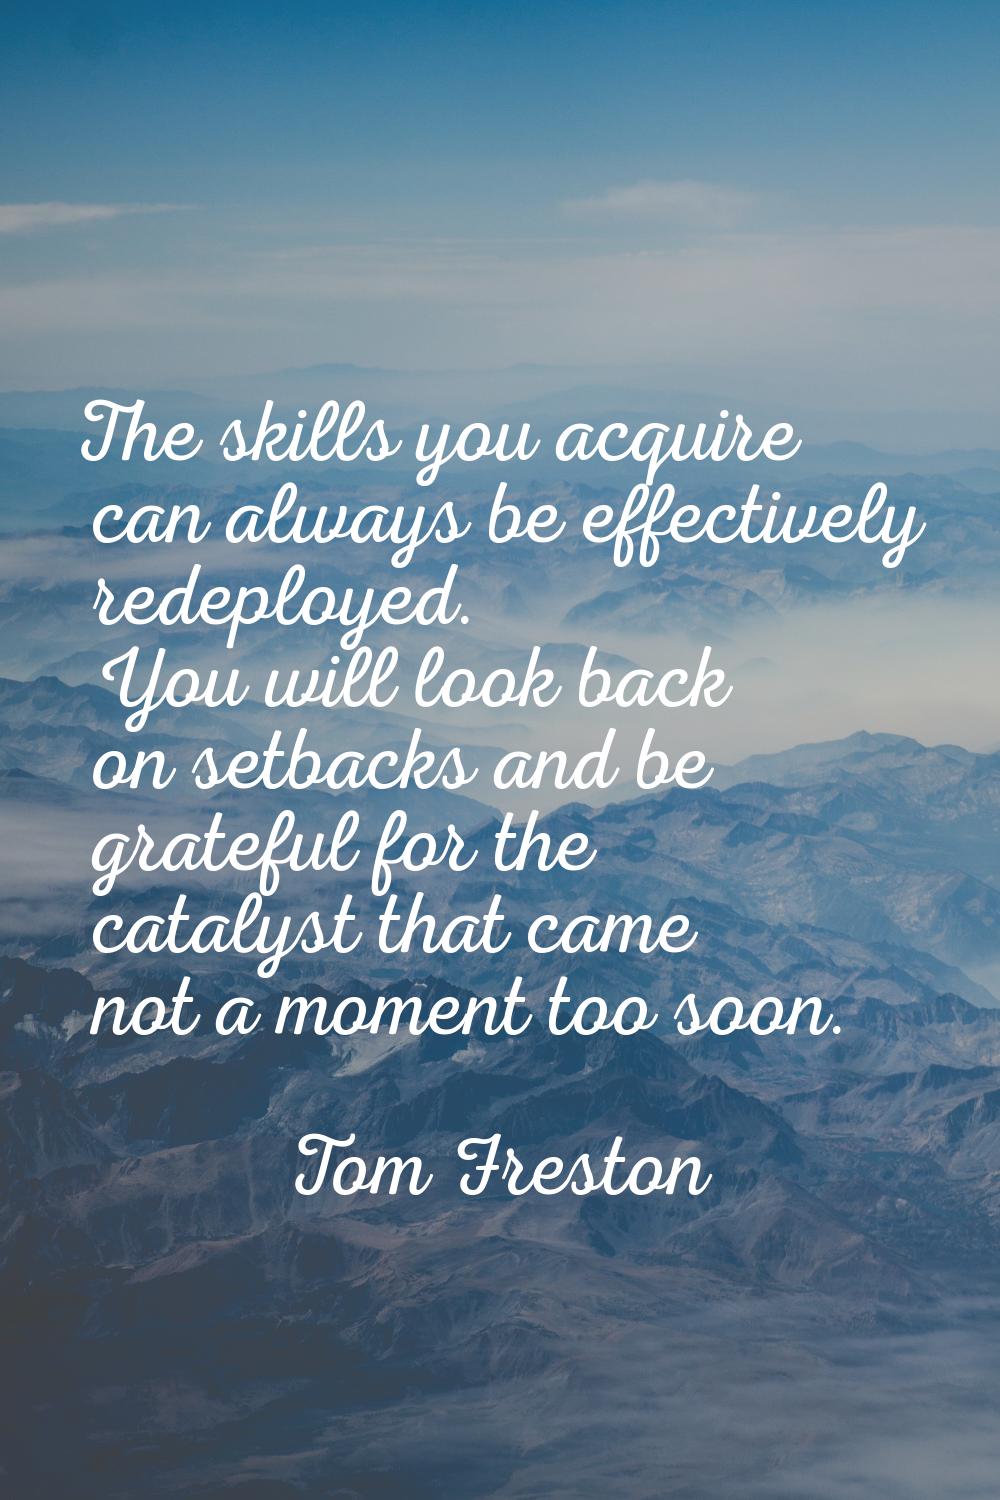 The skills you acquire can always be effectively redeployed. You will look back on setbacks and be 